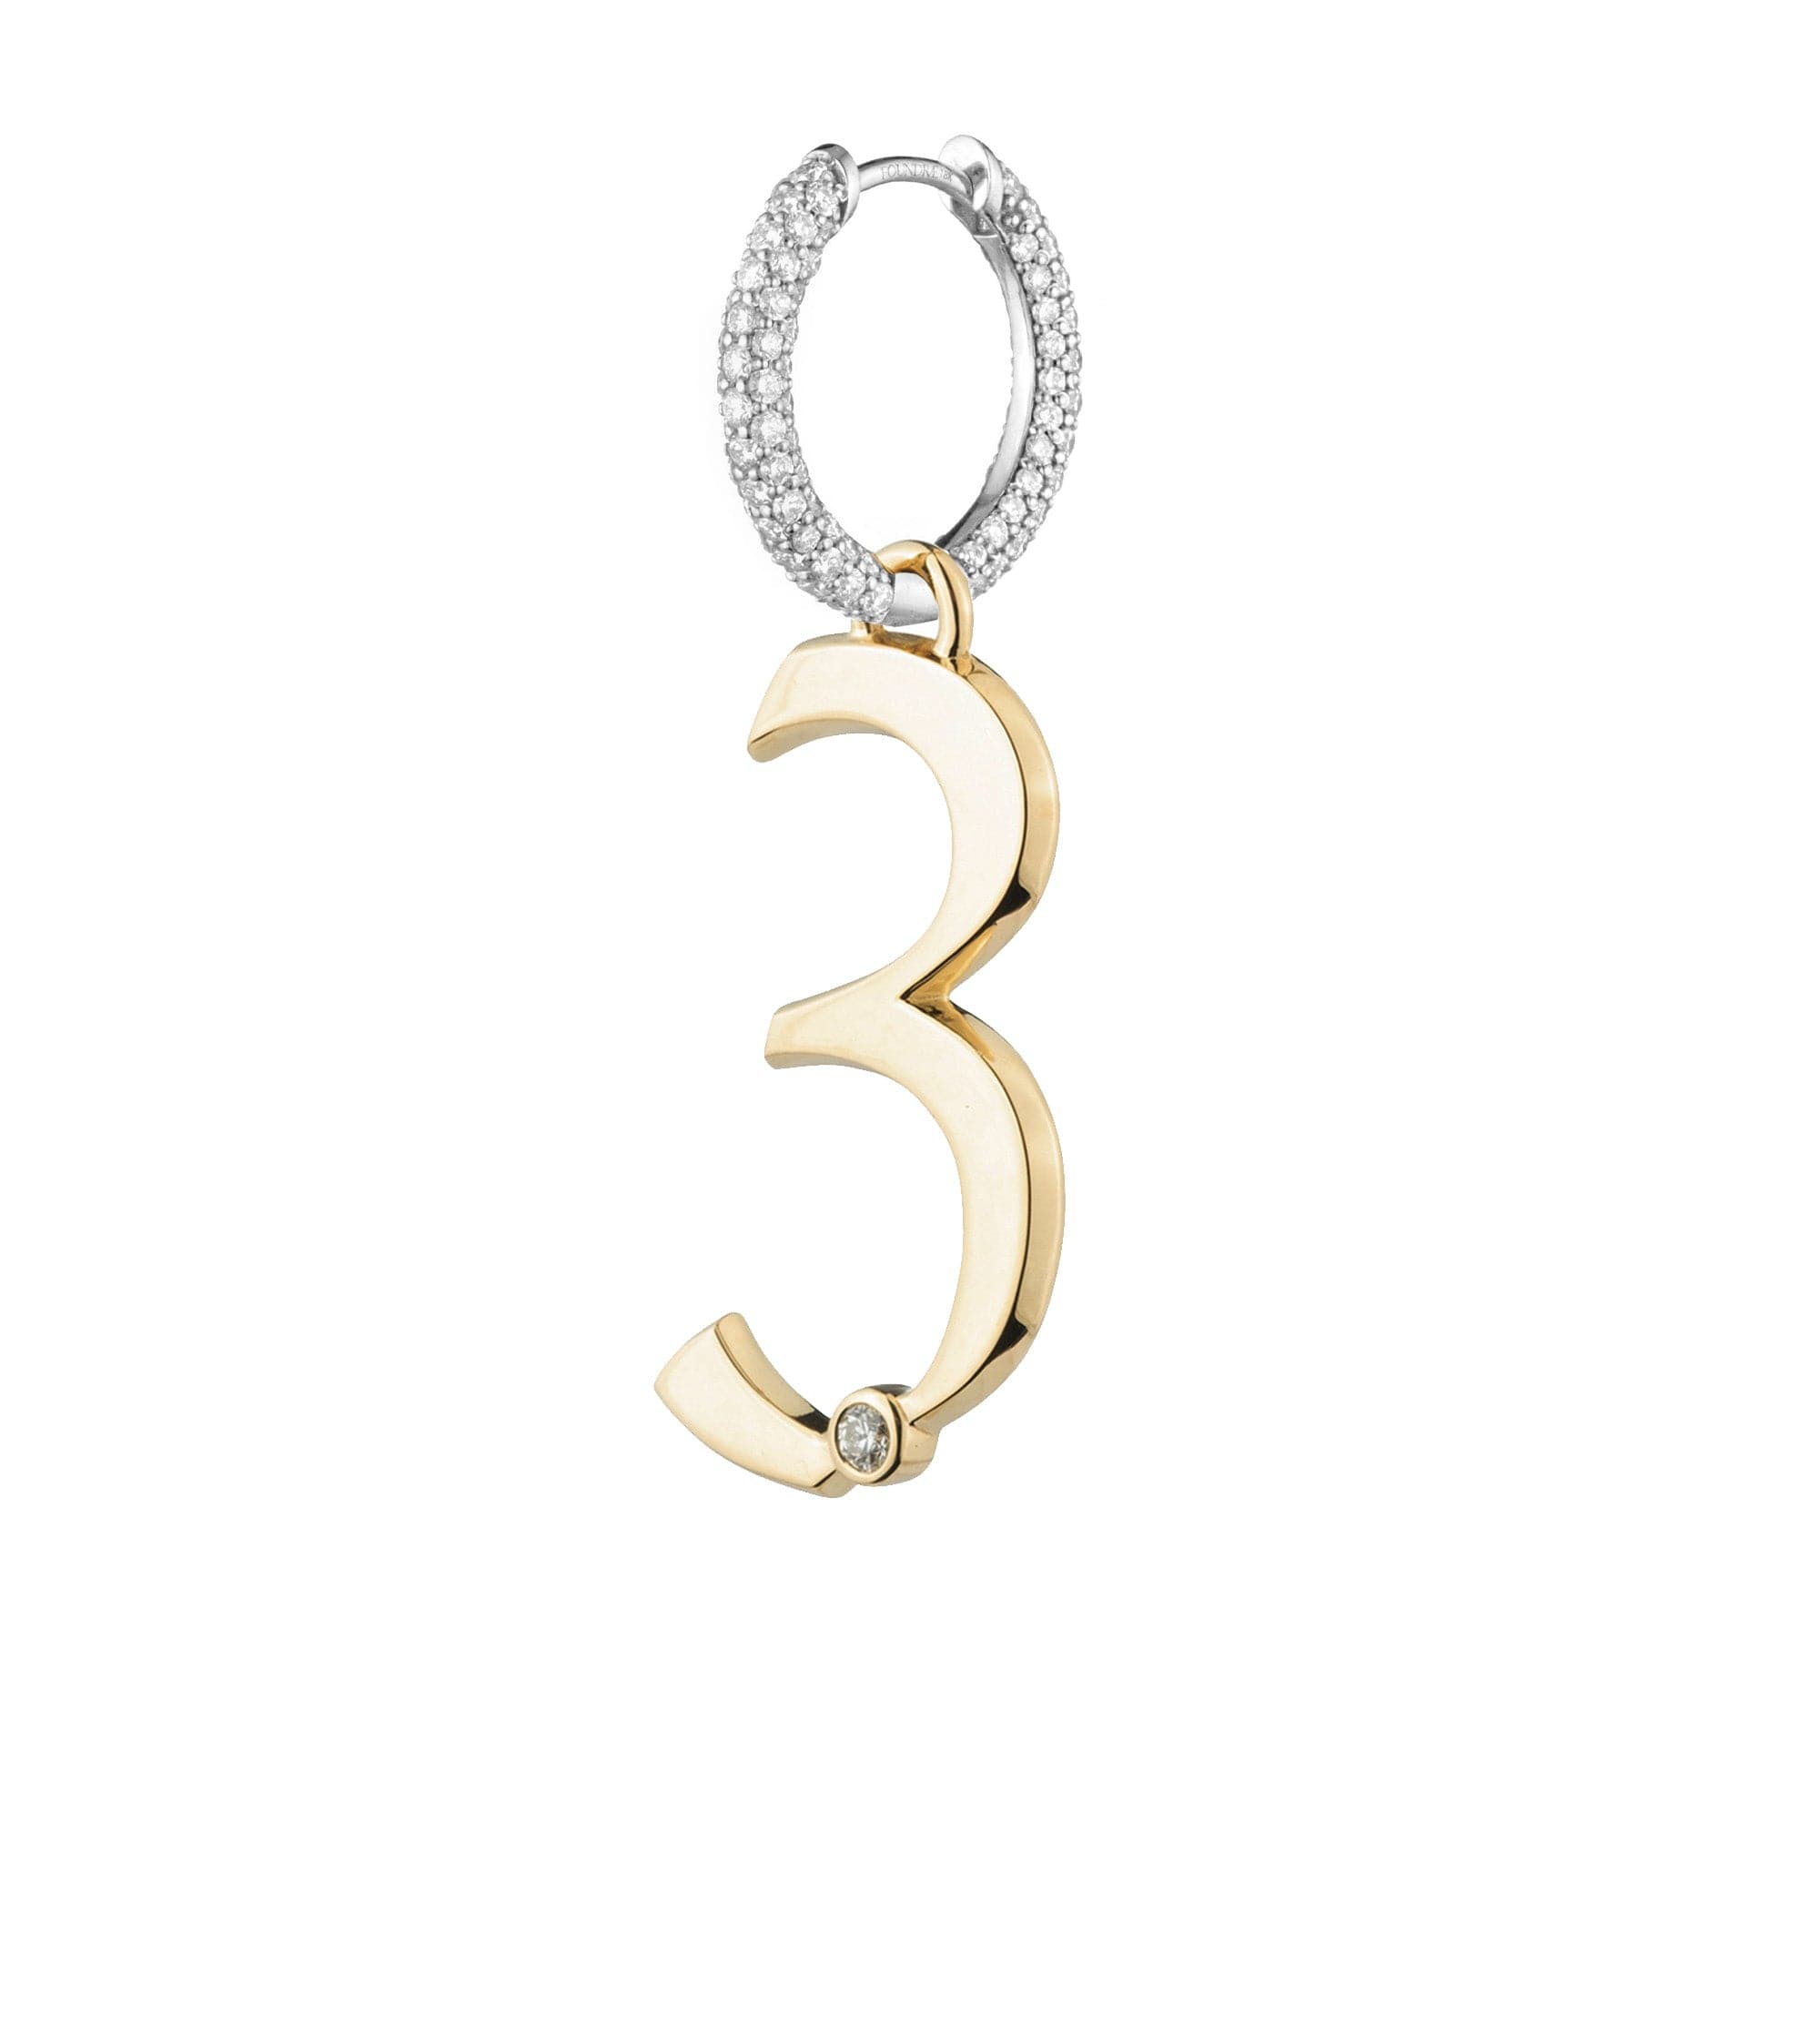 Engravable Number 3 : Oversized Small Pave Chubby Ear Hoop